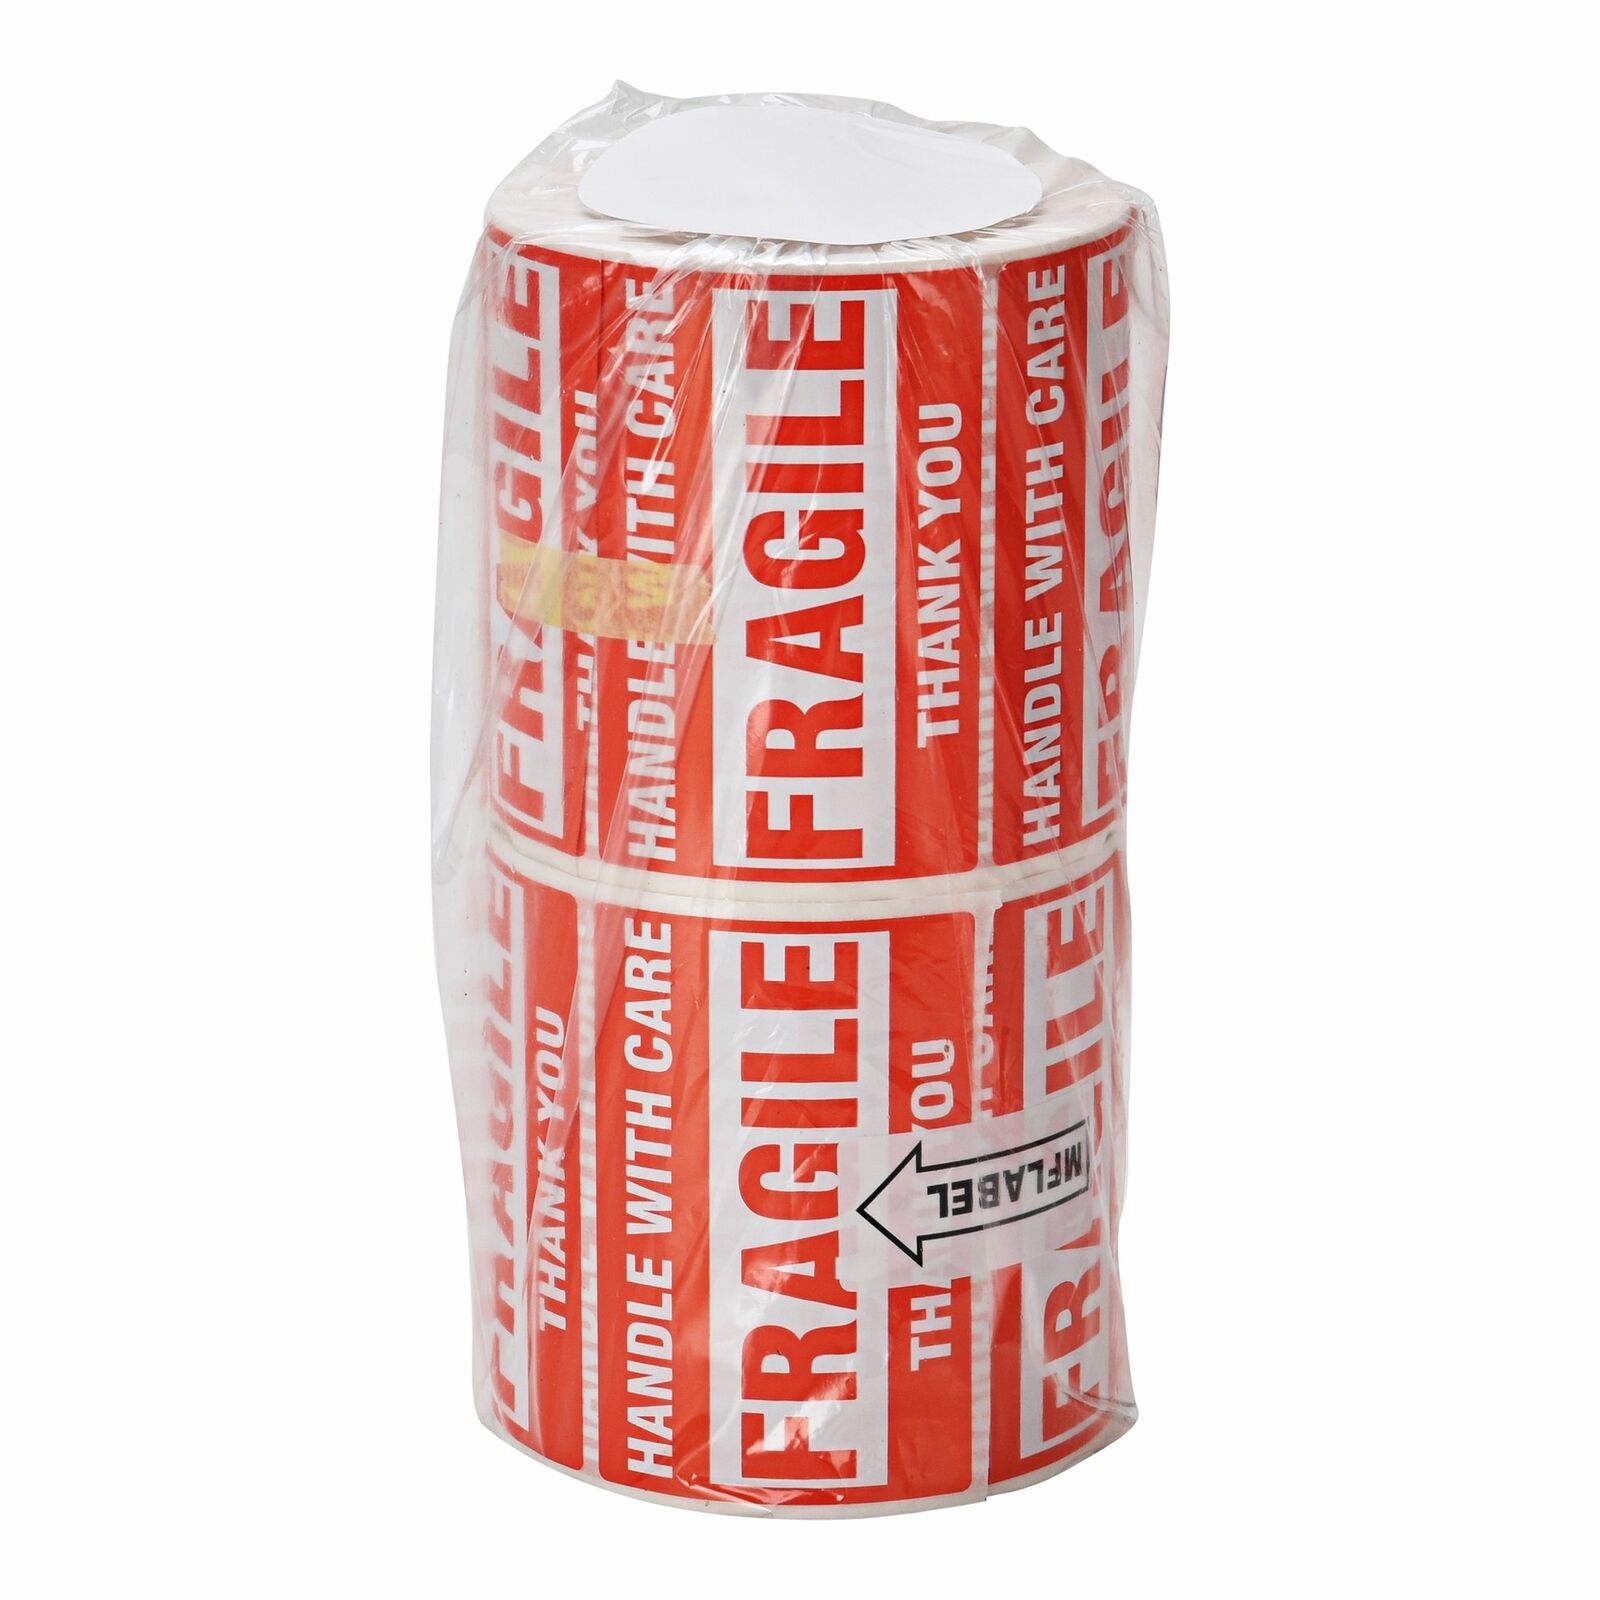 1000 Fragile Stickers 2x3 Handle with Care Thank You 500 / Roll Warning Labels Unbranded Does Not Apply - фотография #5